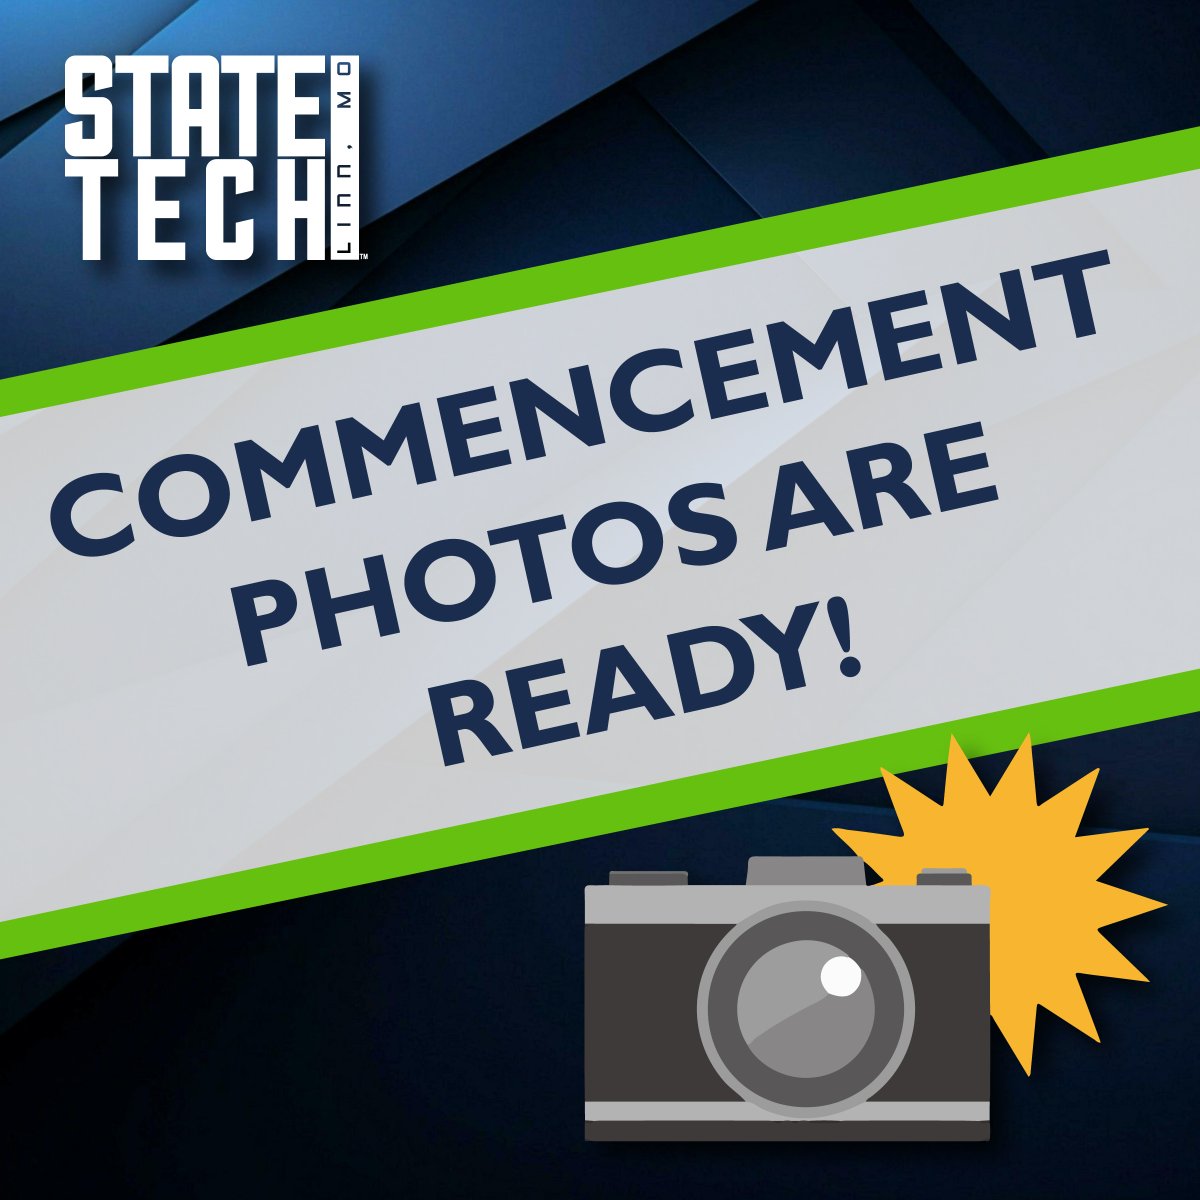 2024 Commencement photos are now ready to view! Check them out at statetechmo.edu/commencement/.